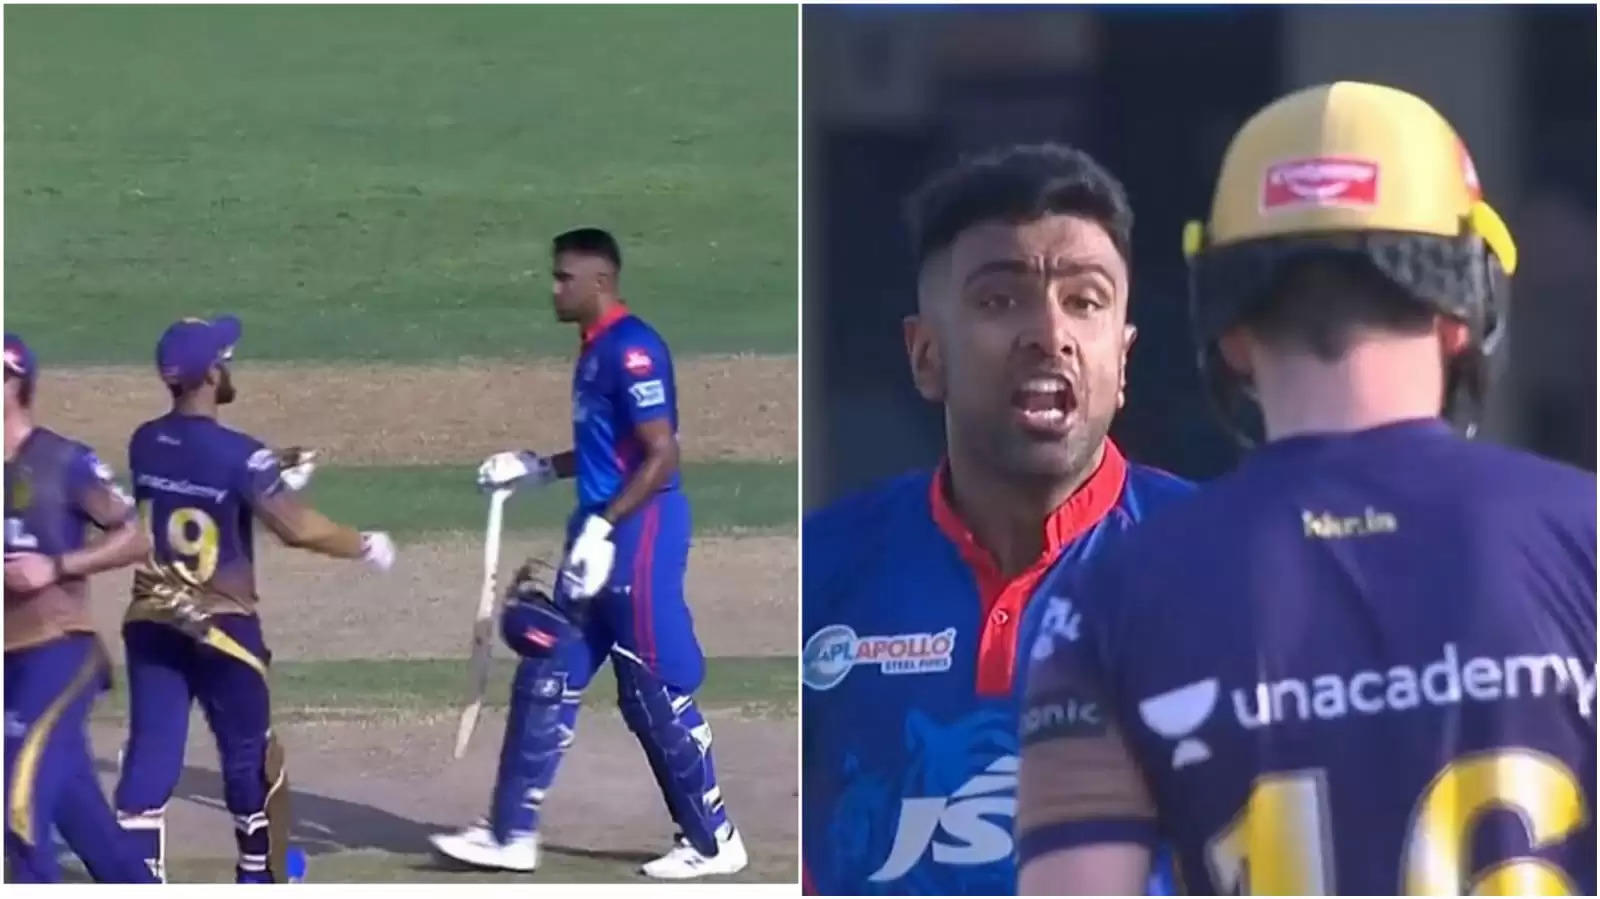 WATCH: Ashwin, seething from earlier sledge, gives Morgan a send off after duck